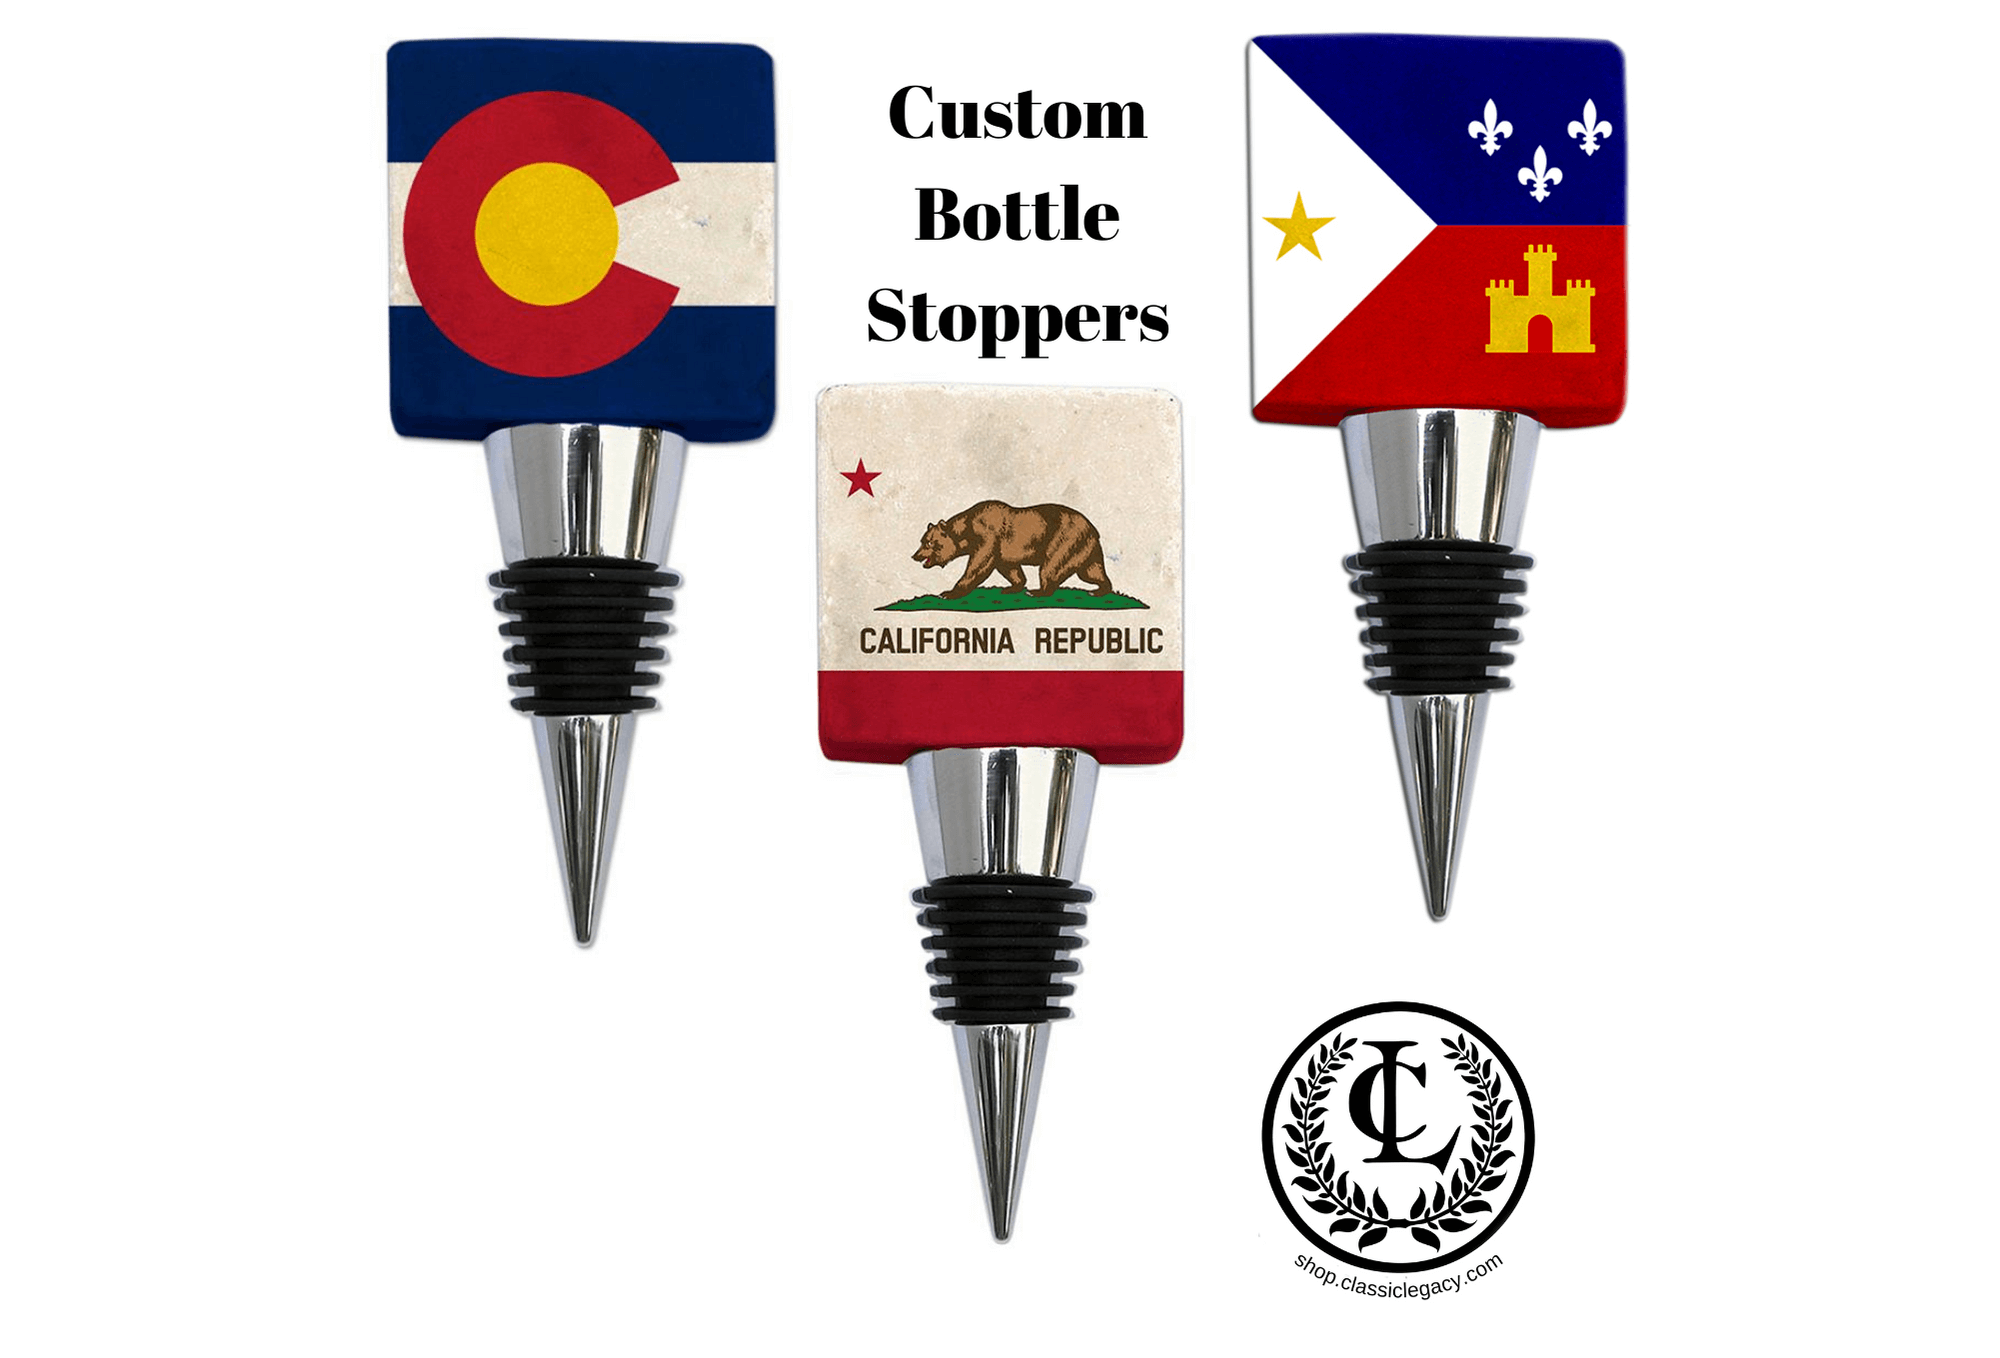 Examples of logo bottle stoppers with state flag images of Colorado and California.